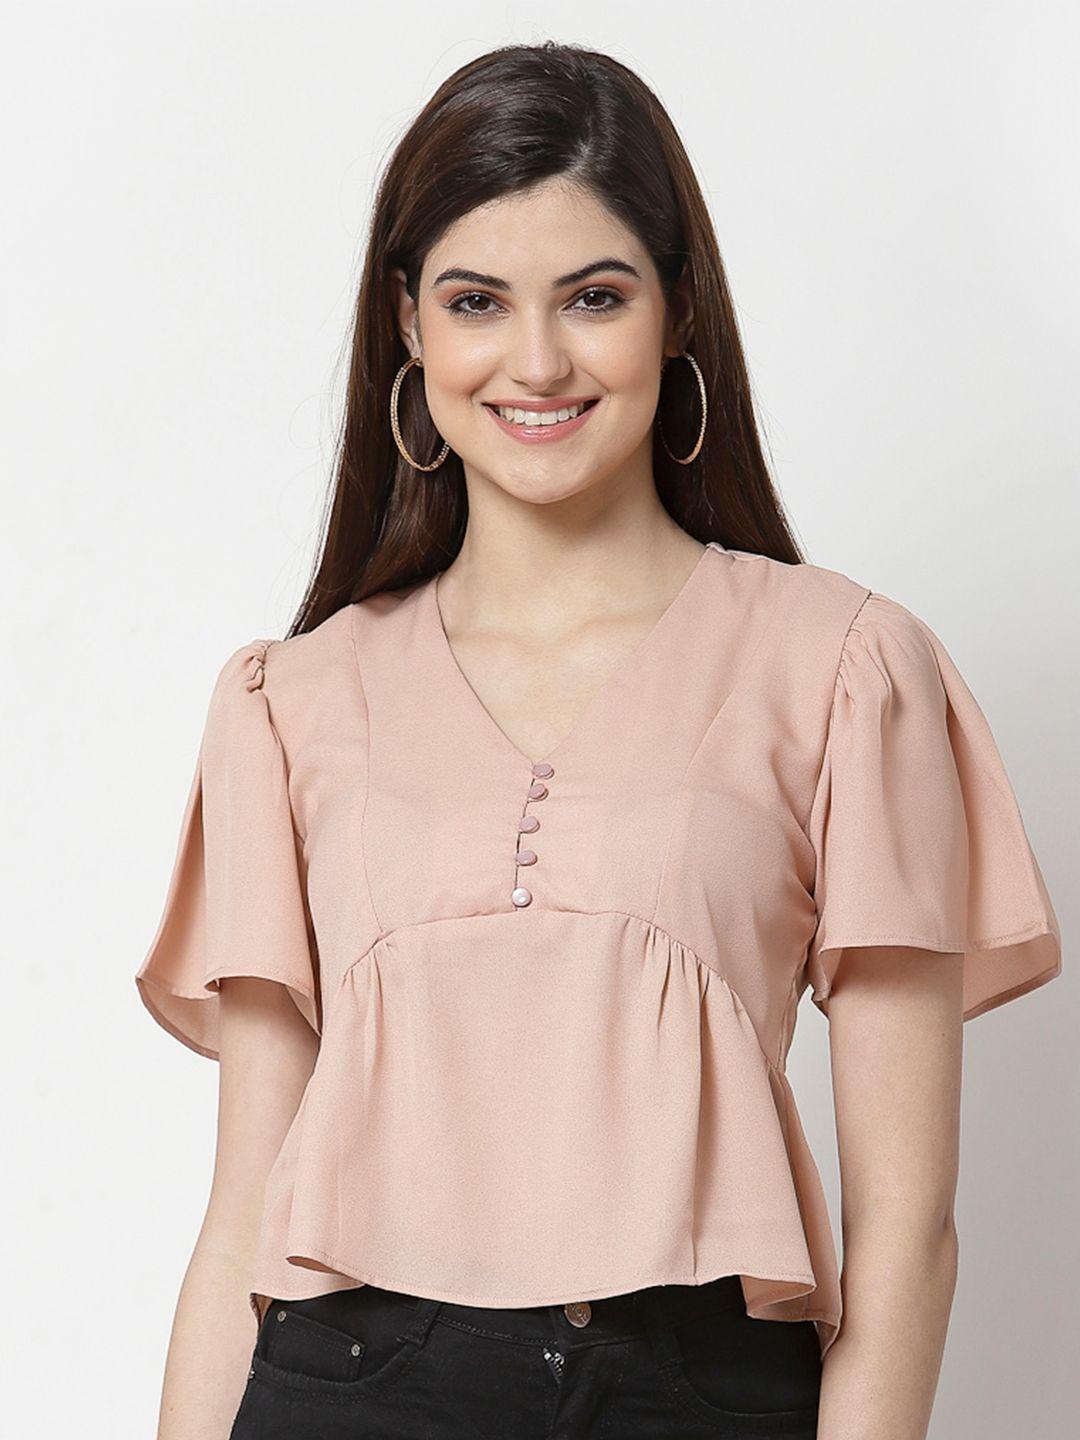 style quotient nude-coloured crepe top